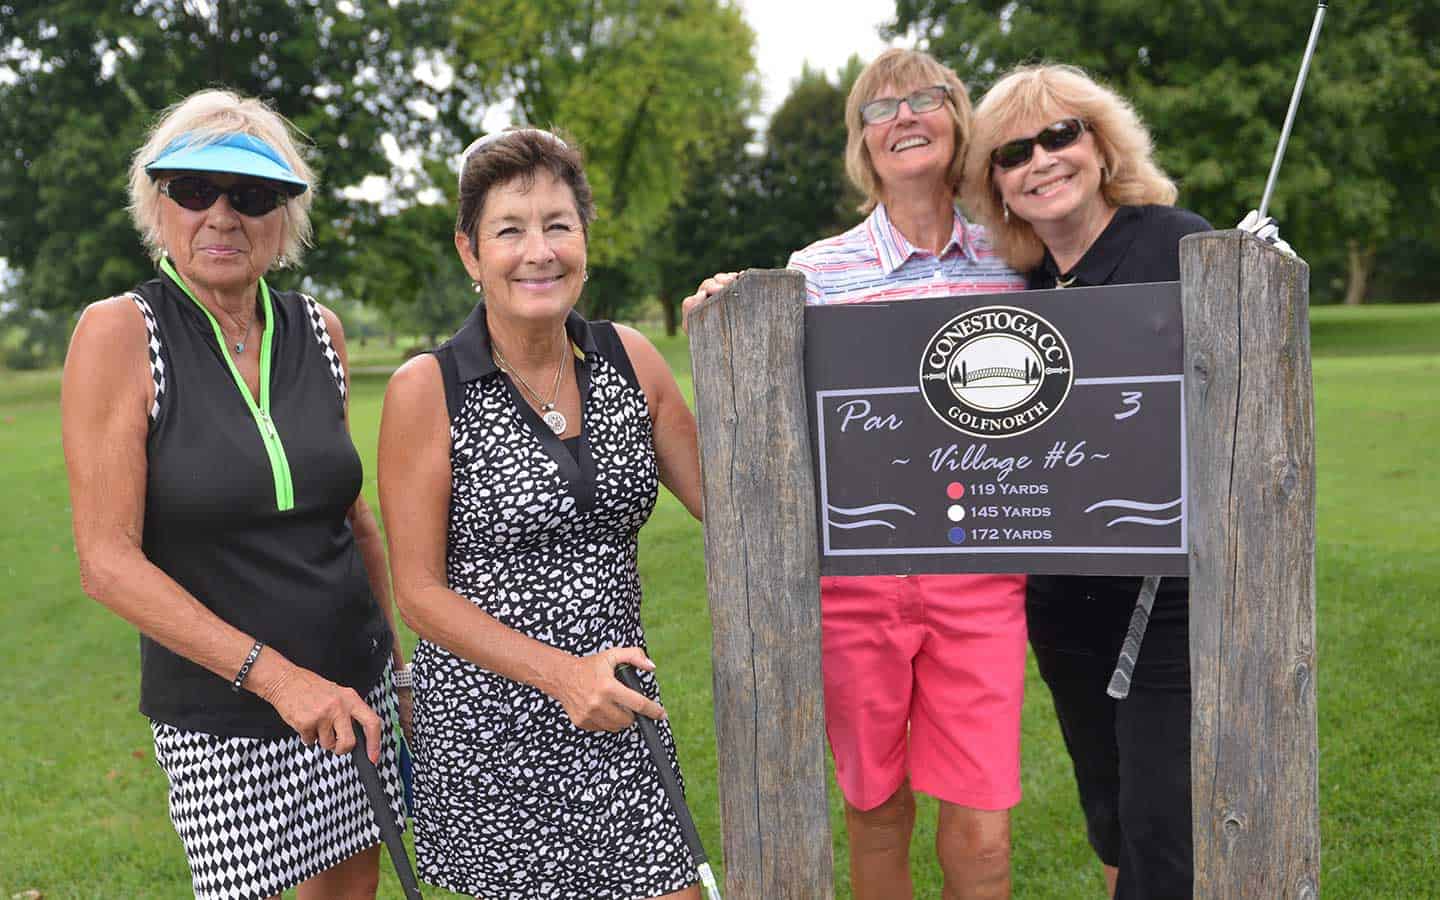 Teeing up something different for this year’s Jeanne Renault Golf Classic